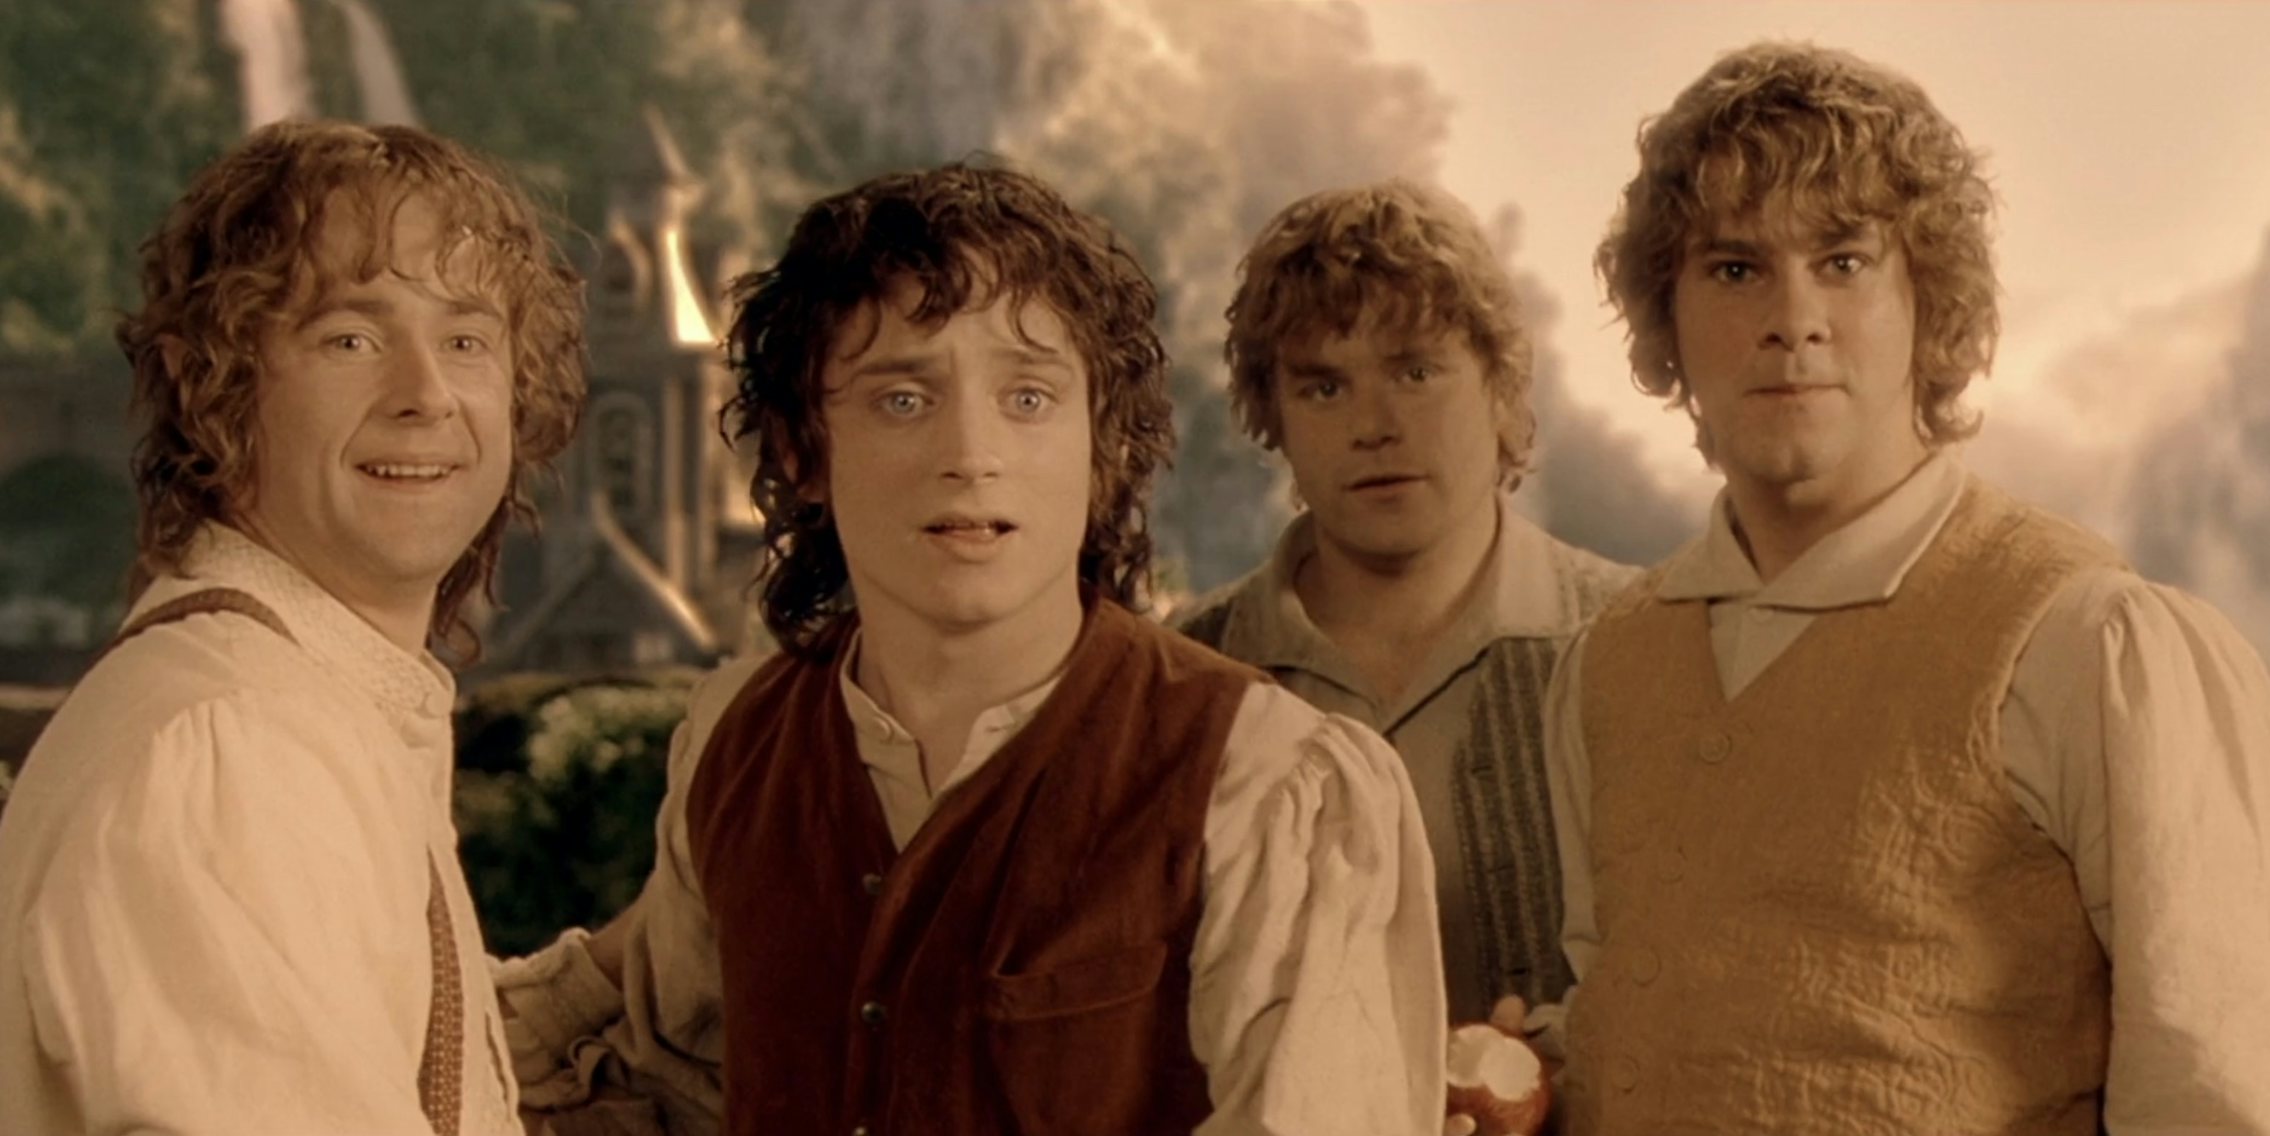 Op-ed: Why The Lord of the Rings movies matter 20 years later